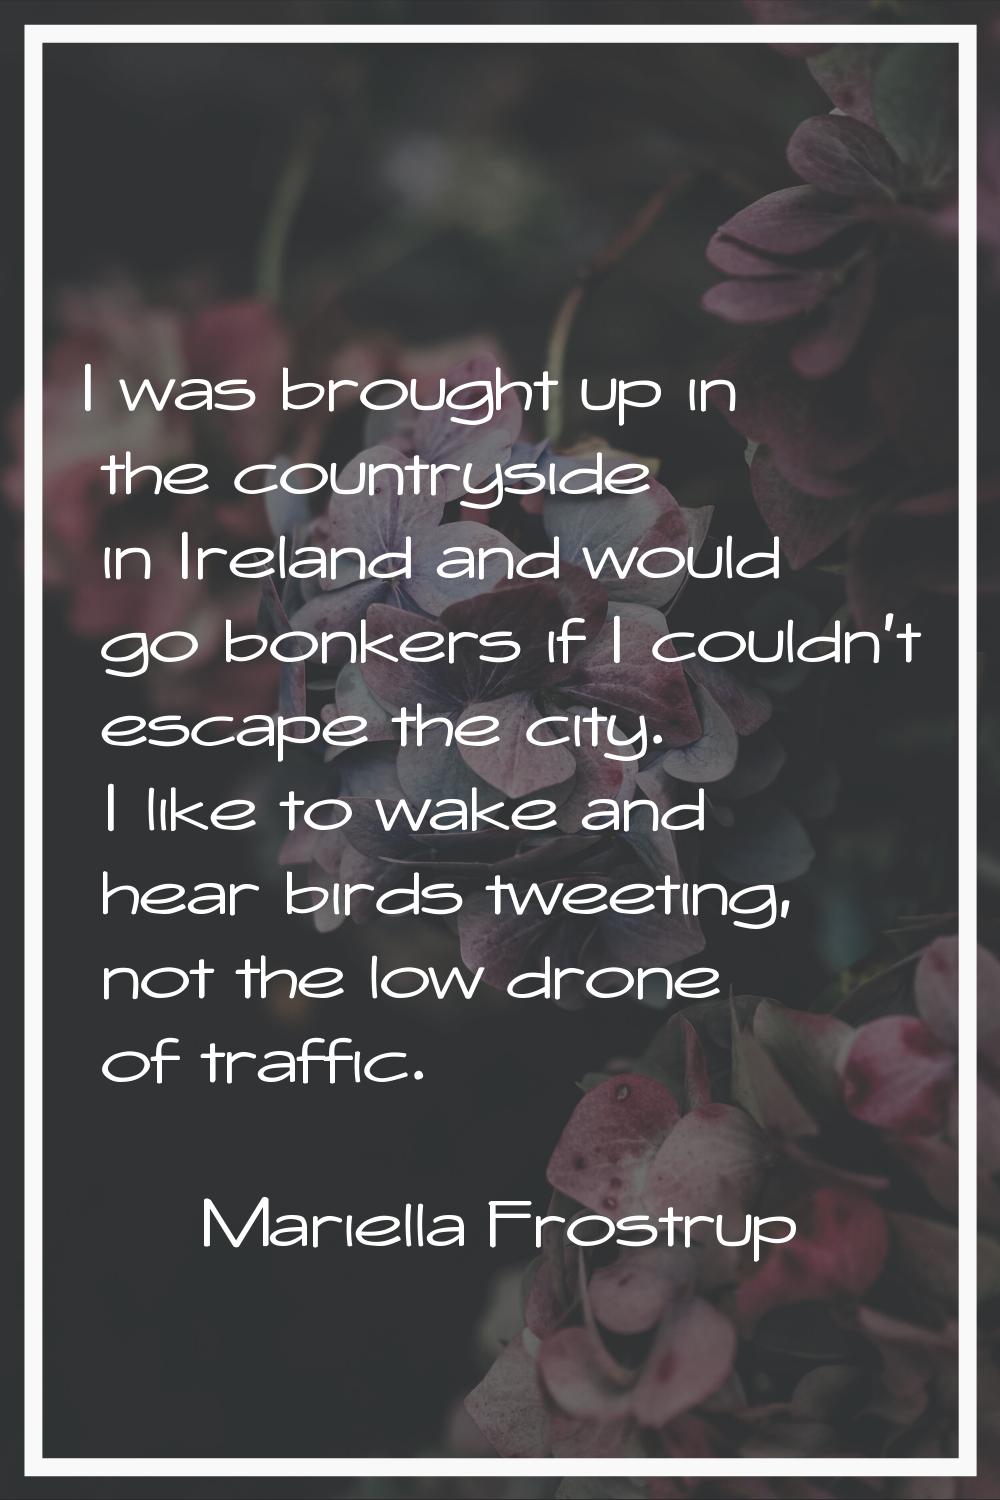 I was brought up in the countryside in Ireland and would go bonkers if I couldn't escape the city. 